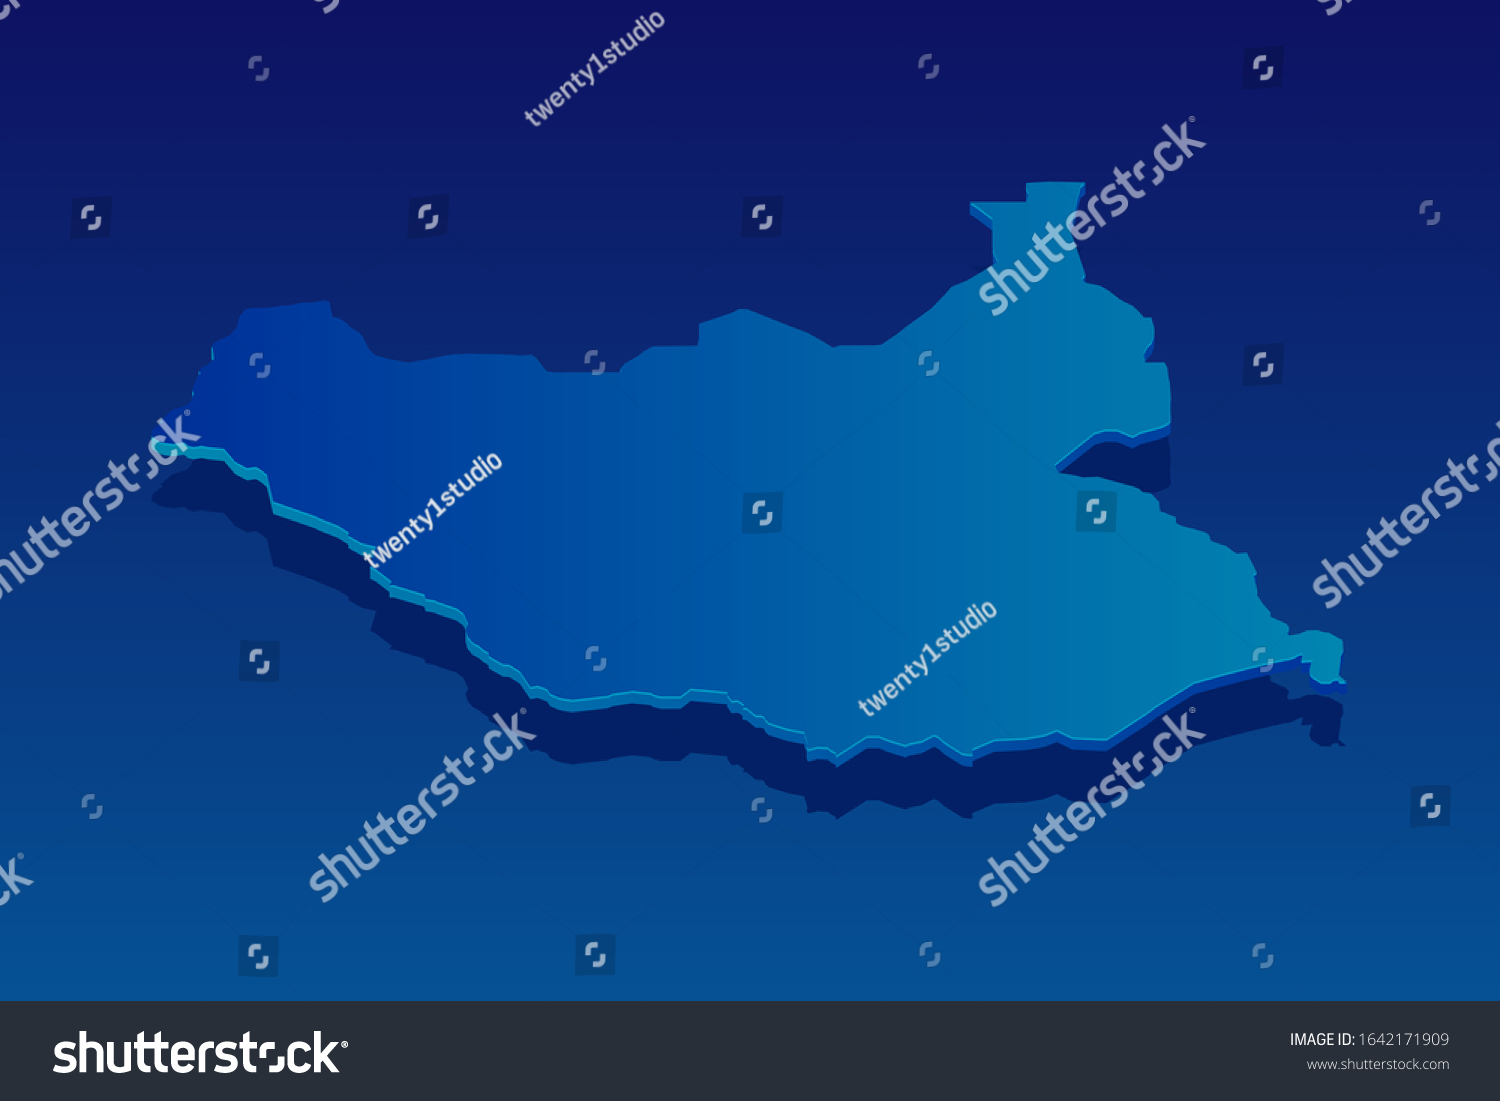 map of South Sudan on blue background. Vector modern isometric concept greeting Card illustration eps 10. #1642171909